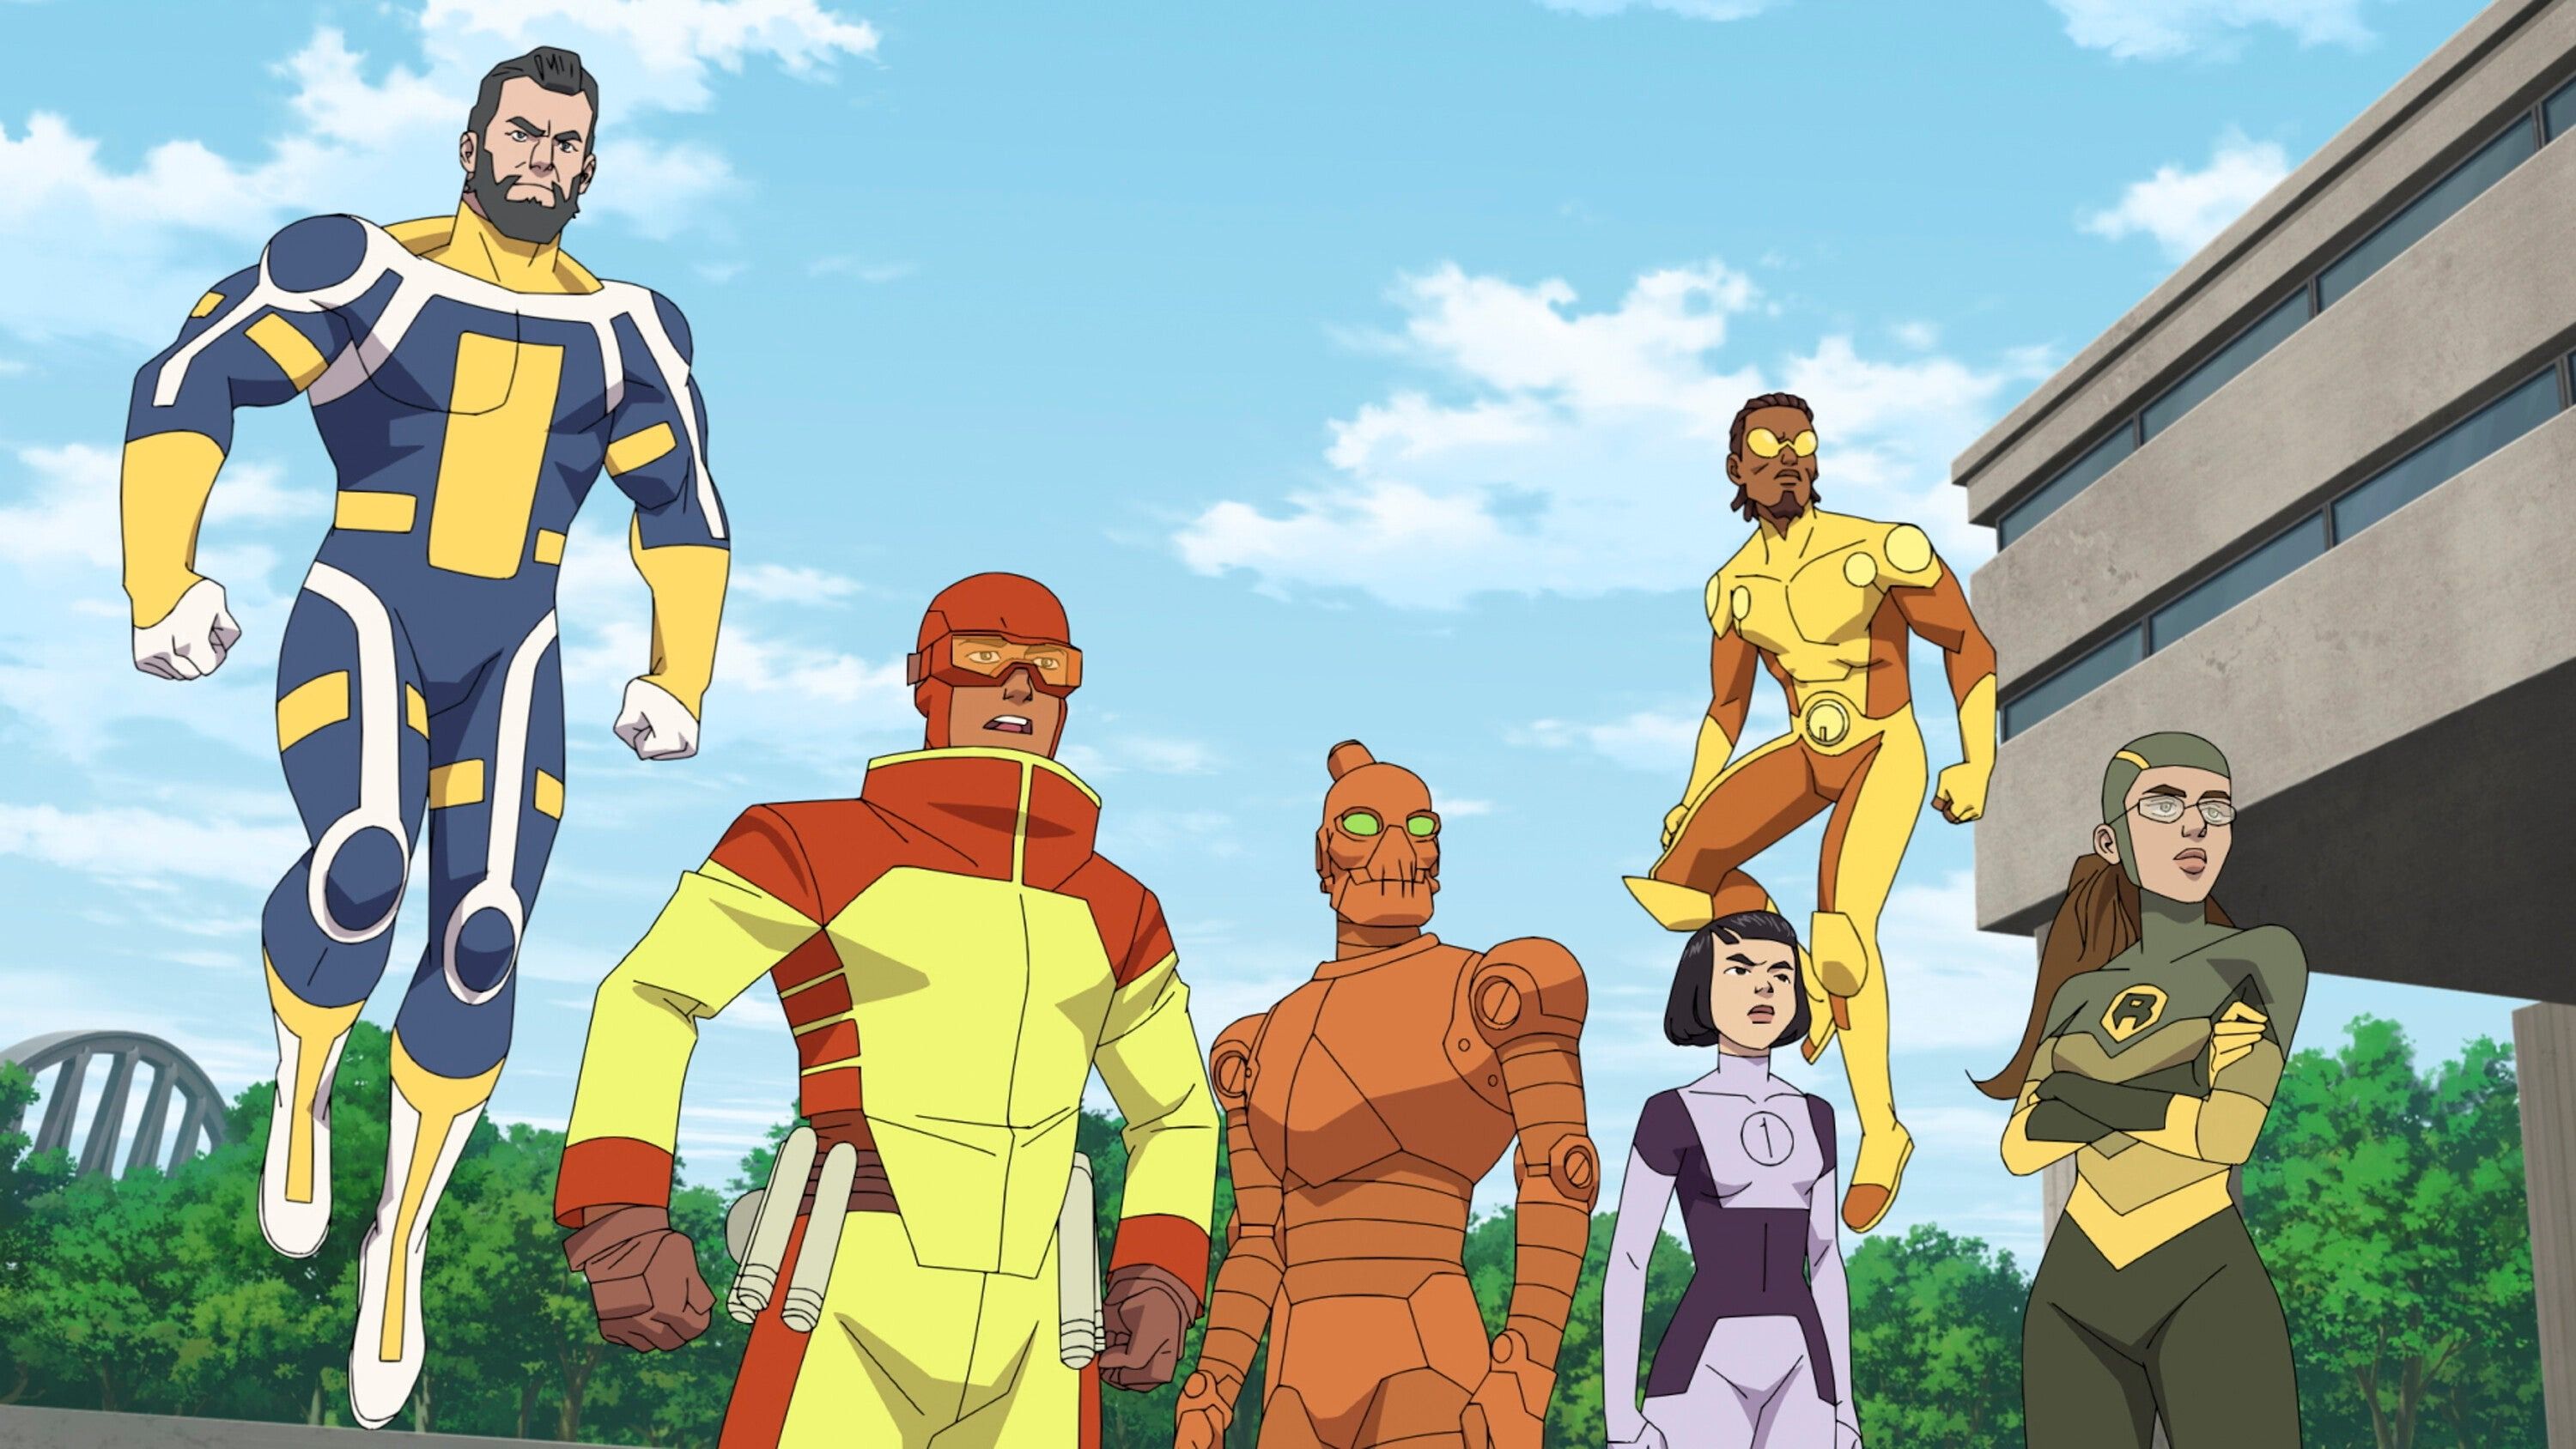 Invincible' Season 2 Part 2: Cast, News, Updates, and More